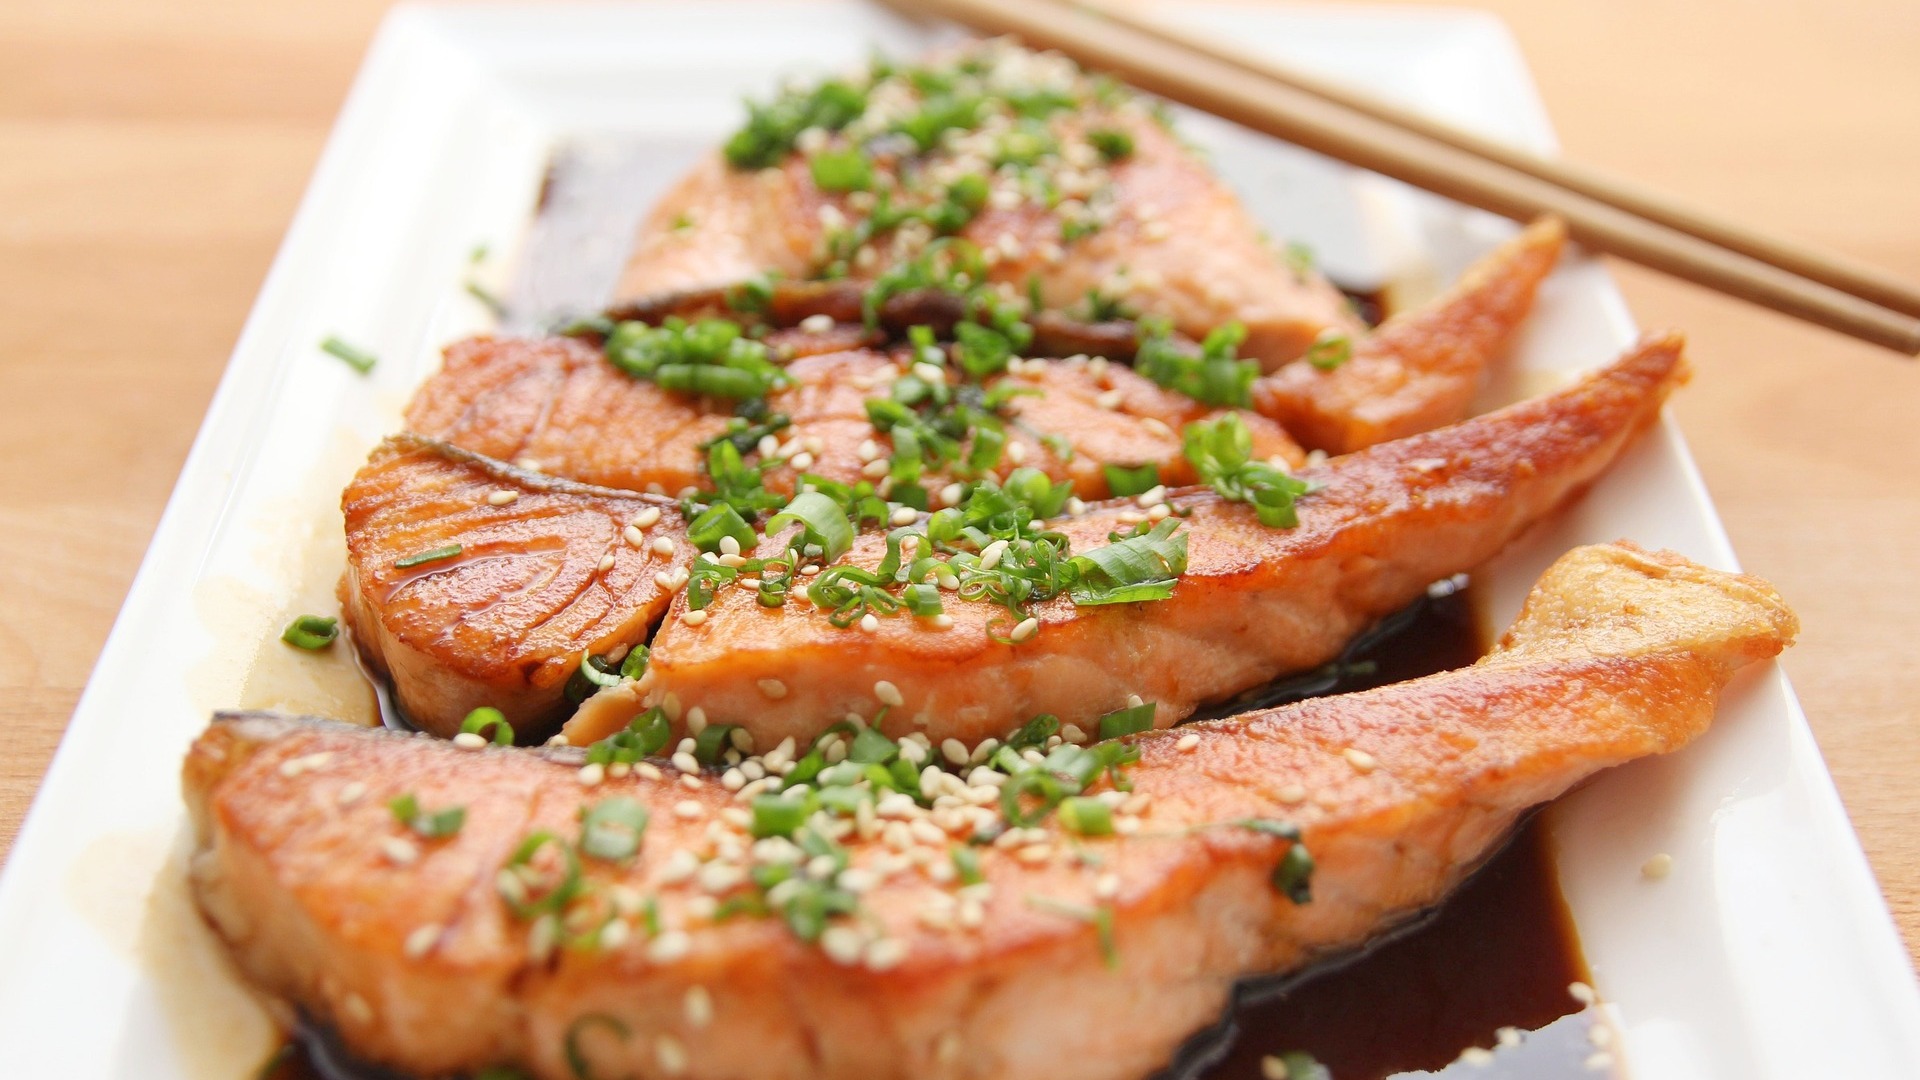 Raw fish with sesame seeds and spring onion, with a sauce; raw fish is a common cause of food poisoning, which our No Win No Fee solicitors can assist with a claim for.